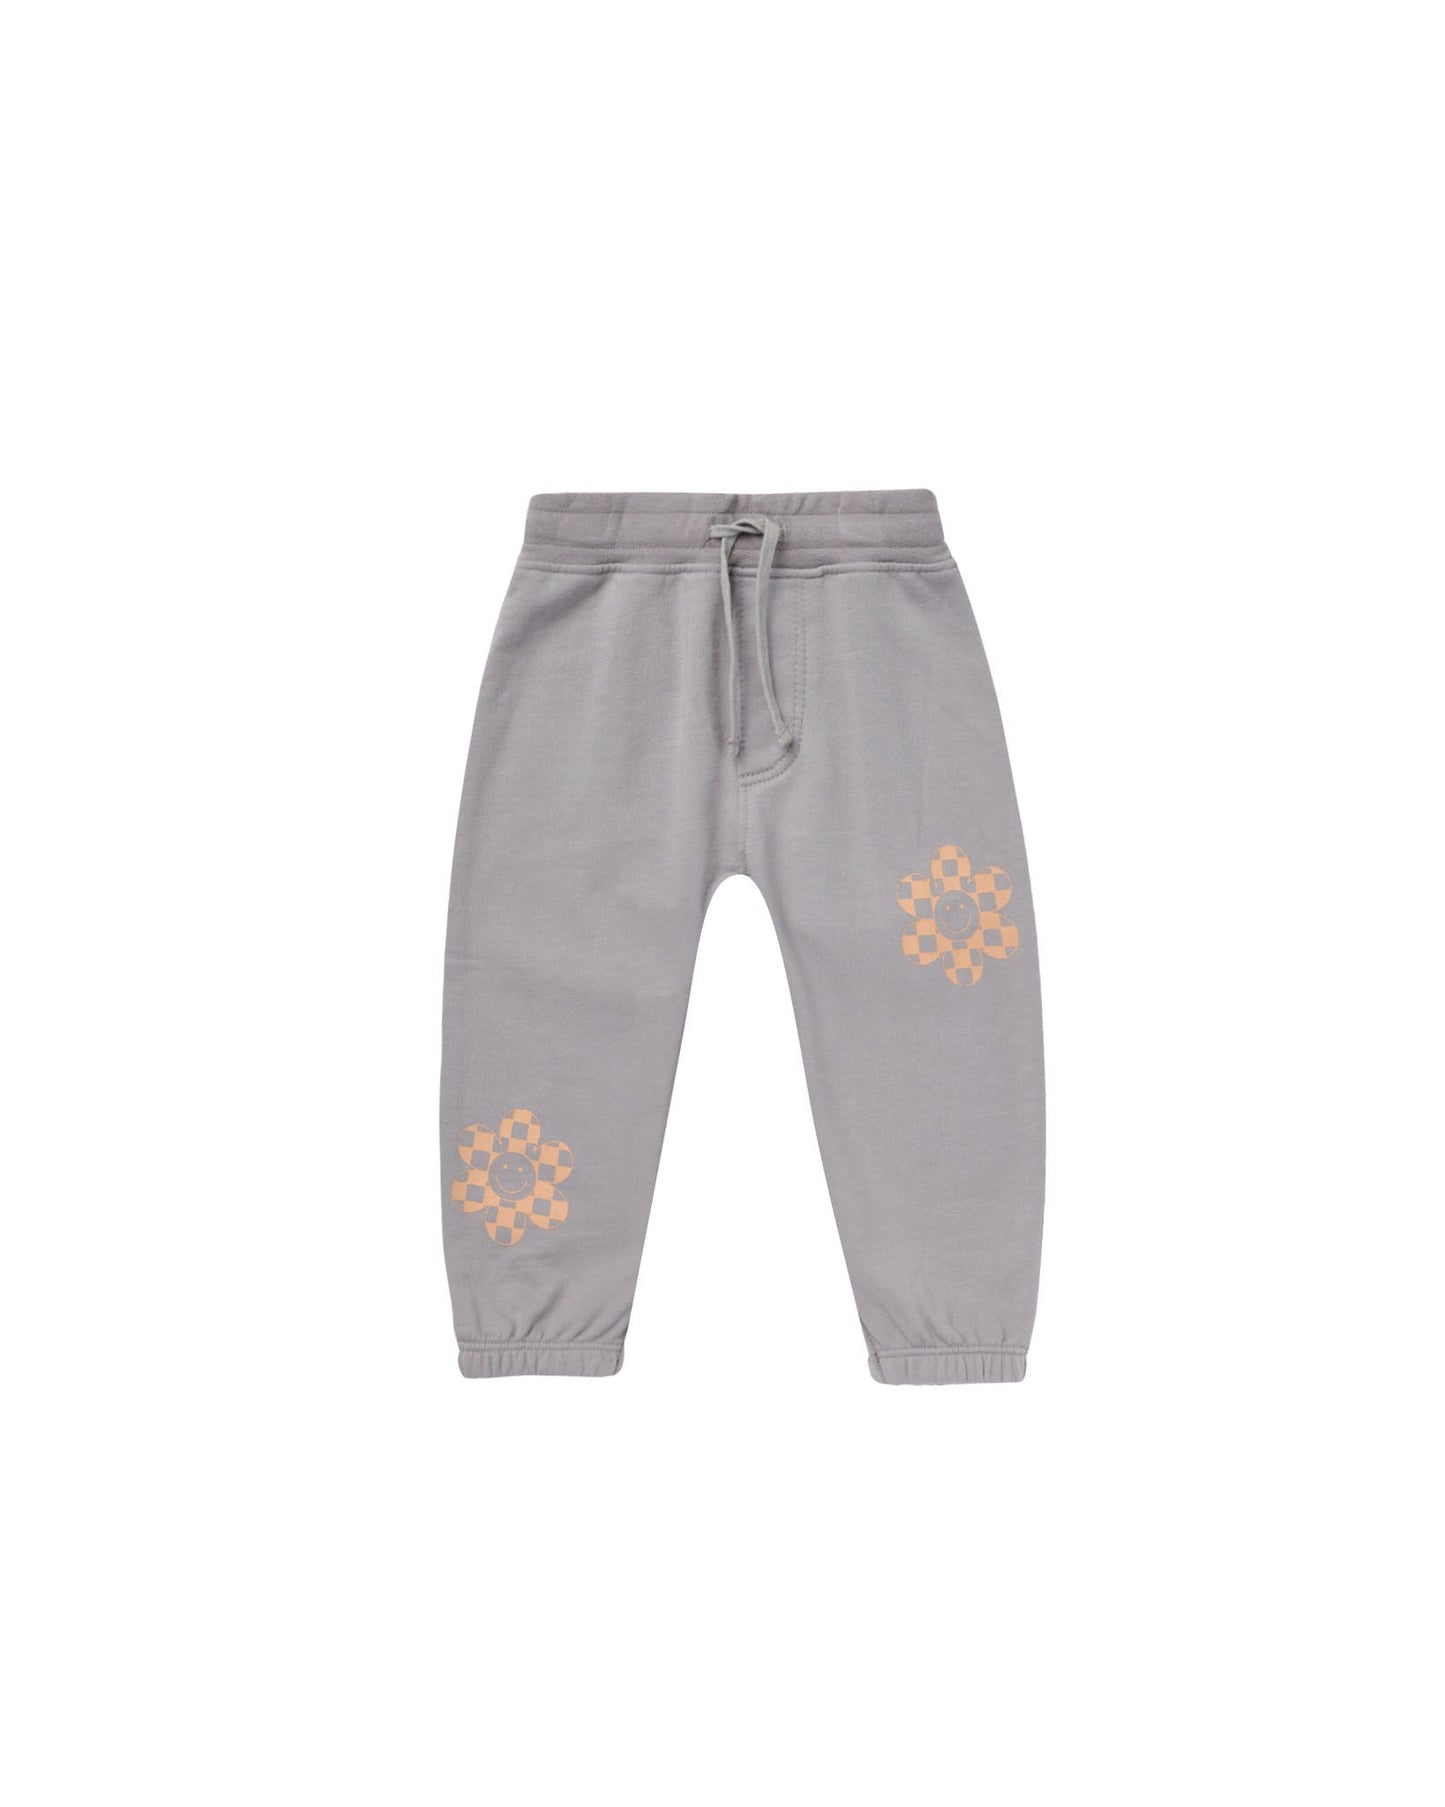 JOGGER PANT || FRENCH BLUE